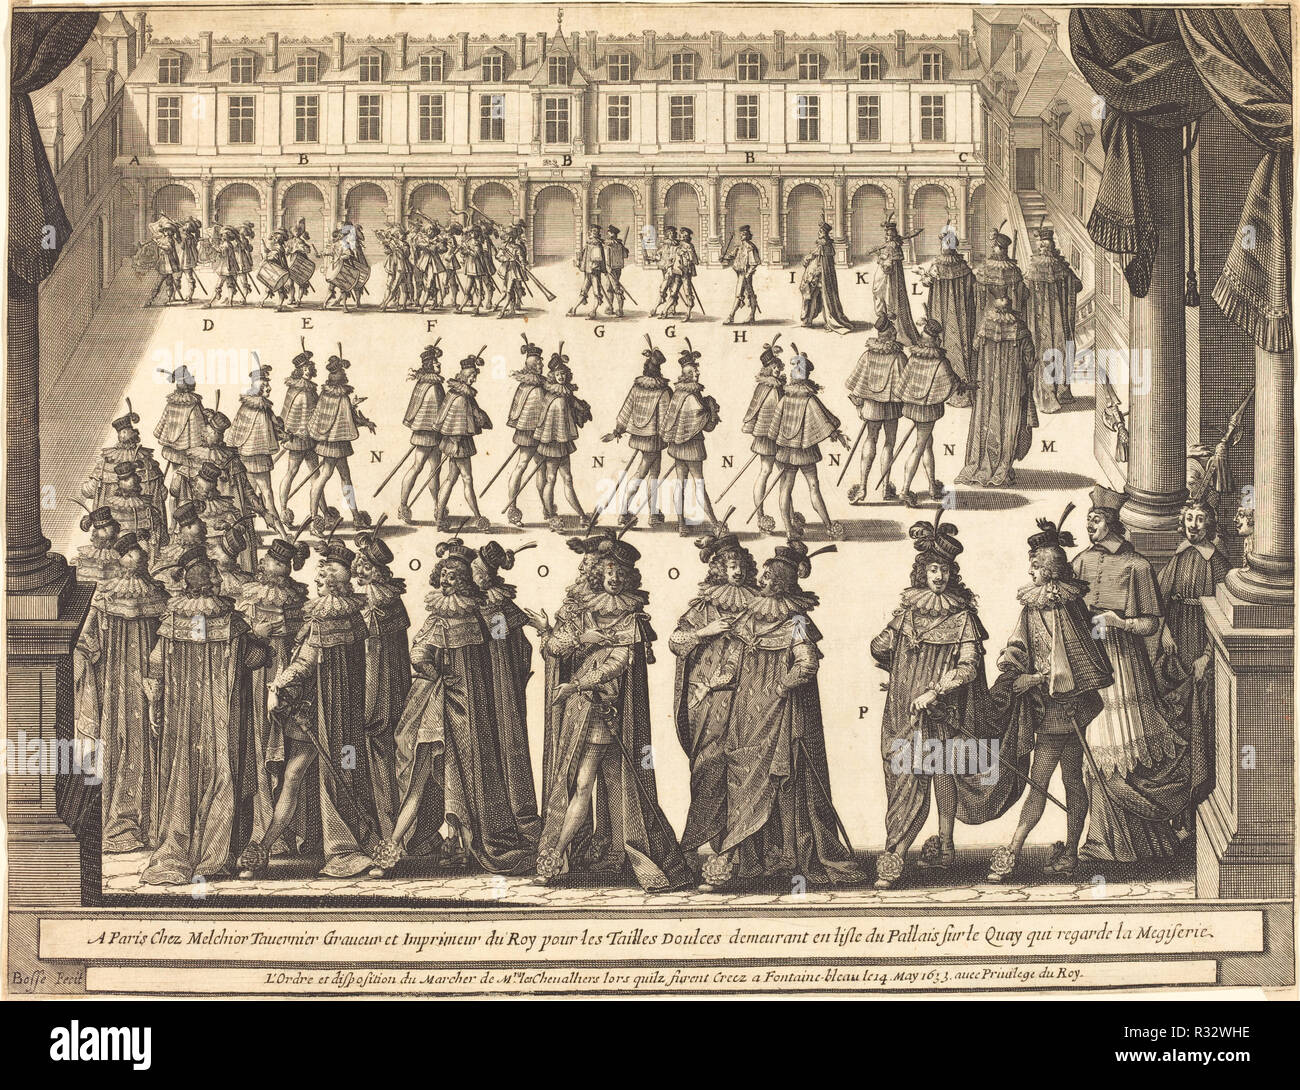 March of the King and Knights of the Holy Spirit in the Courtyard at Fontainebleau. Dated: 1633. Dimensions: sheet (trimmed to plate mark): 27.2 x 35.5 cm (10 11/16 x 14 in.). Medium: etching and engraving. Museum: National Gallery of Art, Washington DC. Author: ABRAHAM BOSSE. Stock Photo